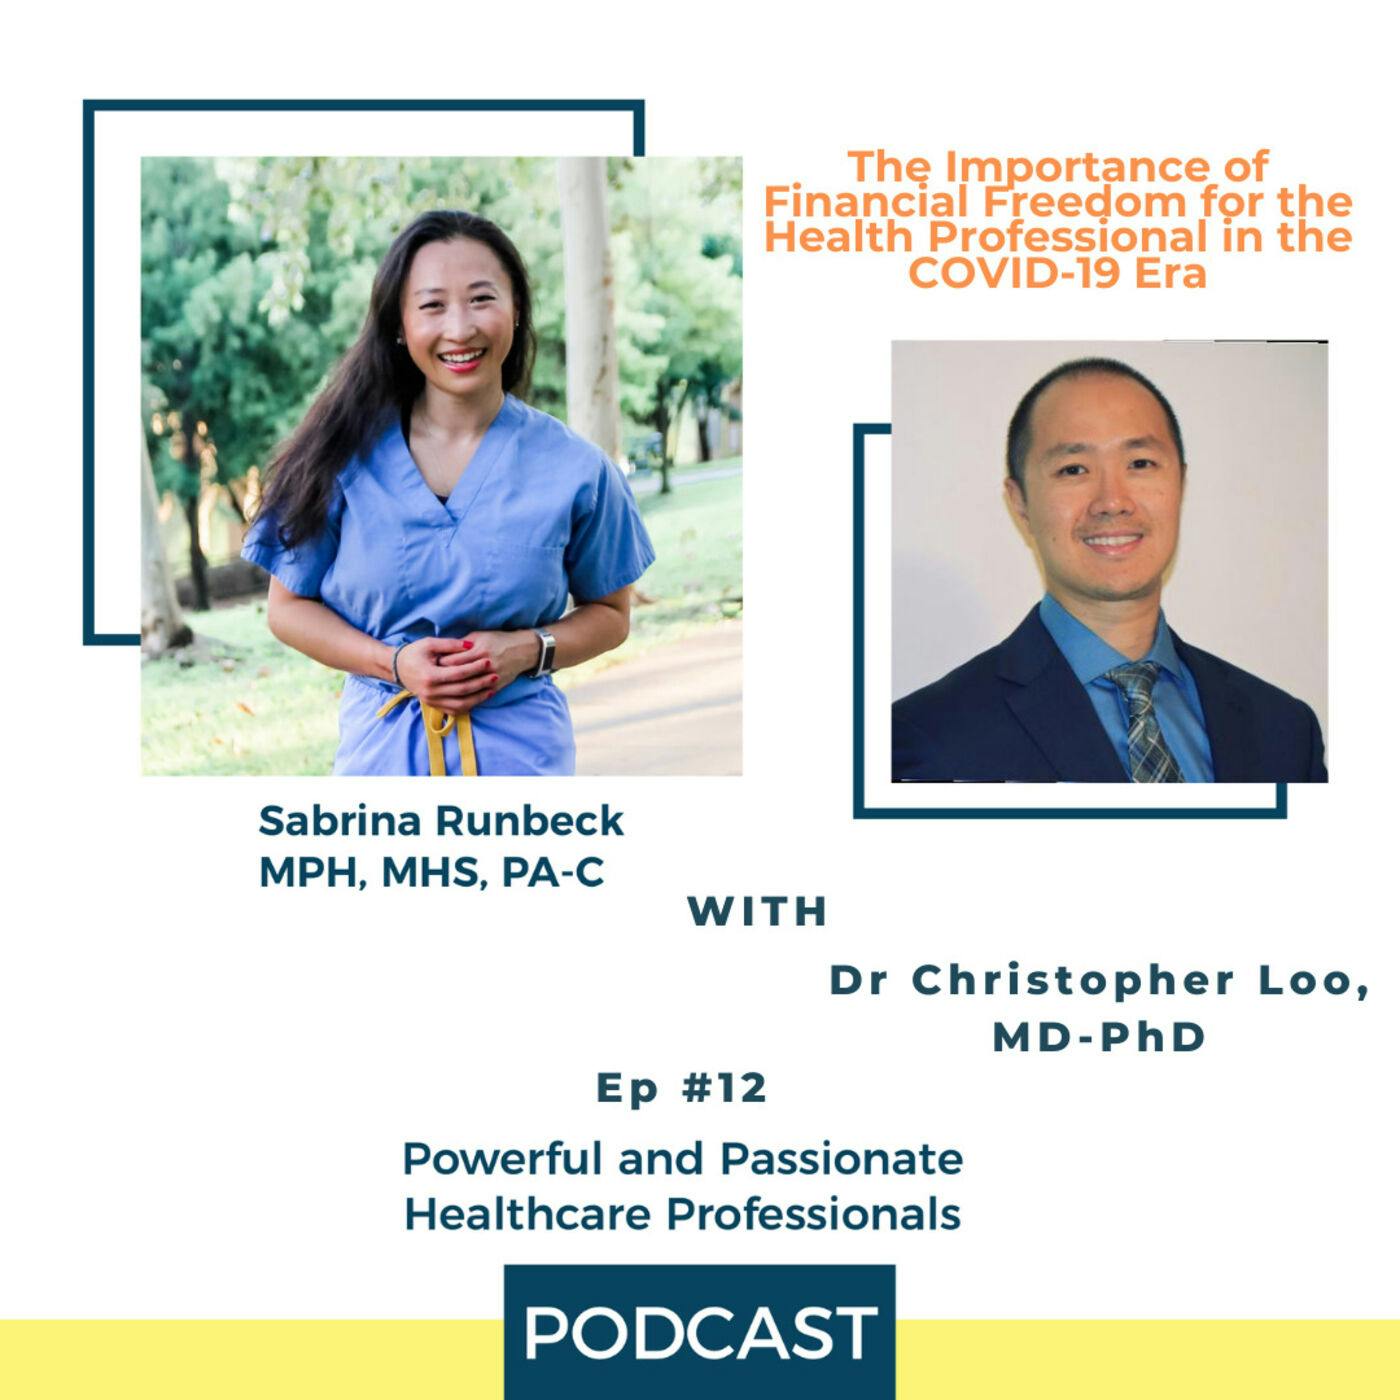 Ep 12 – The Importance of Financial Freedom for the Health Professional in the COVID-19 Era with Dr Christopher Loo, MD-PhD